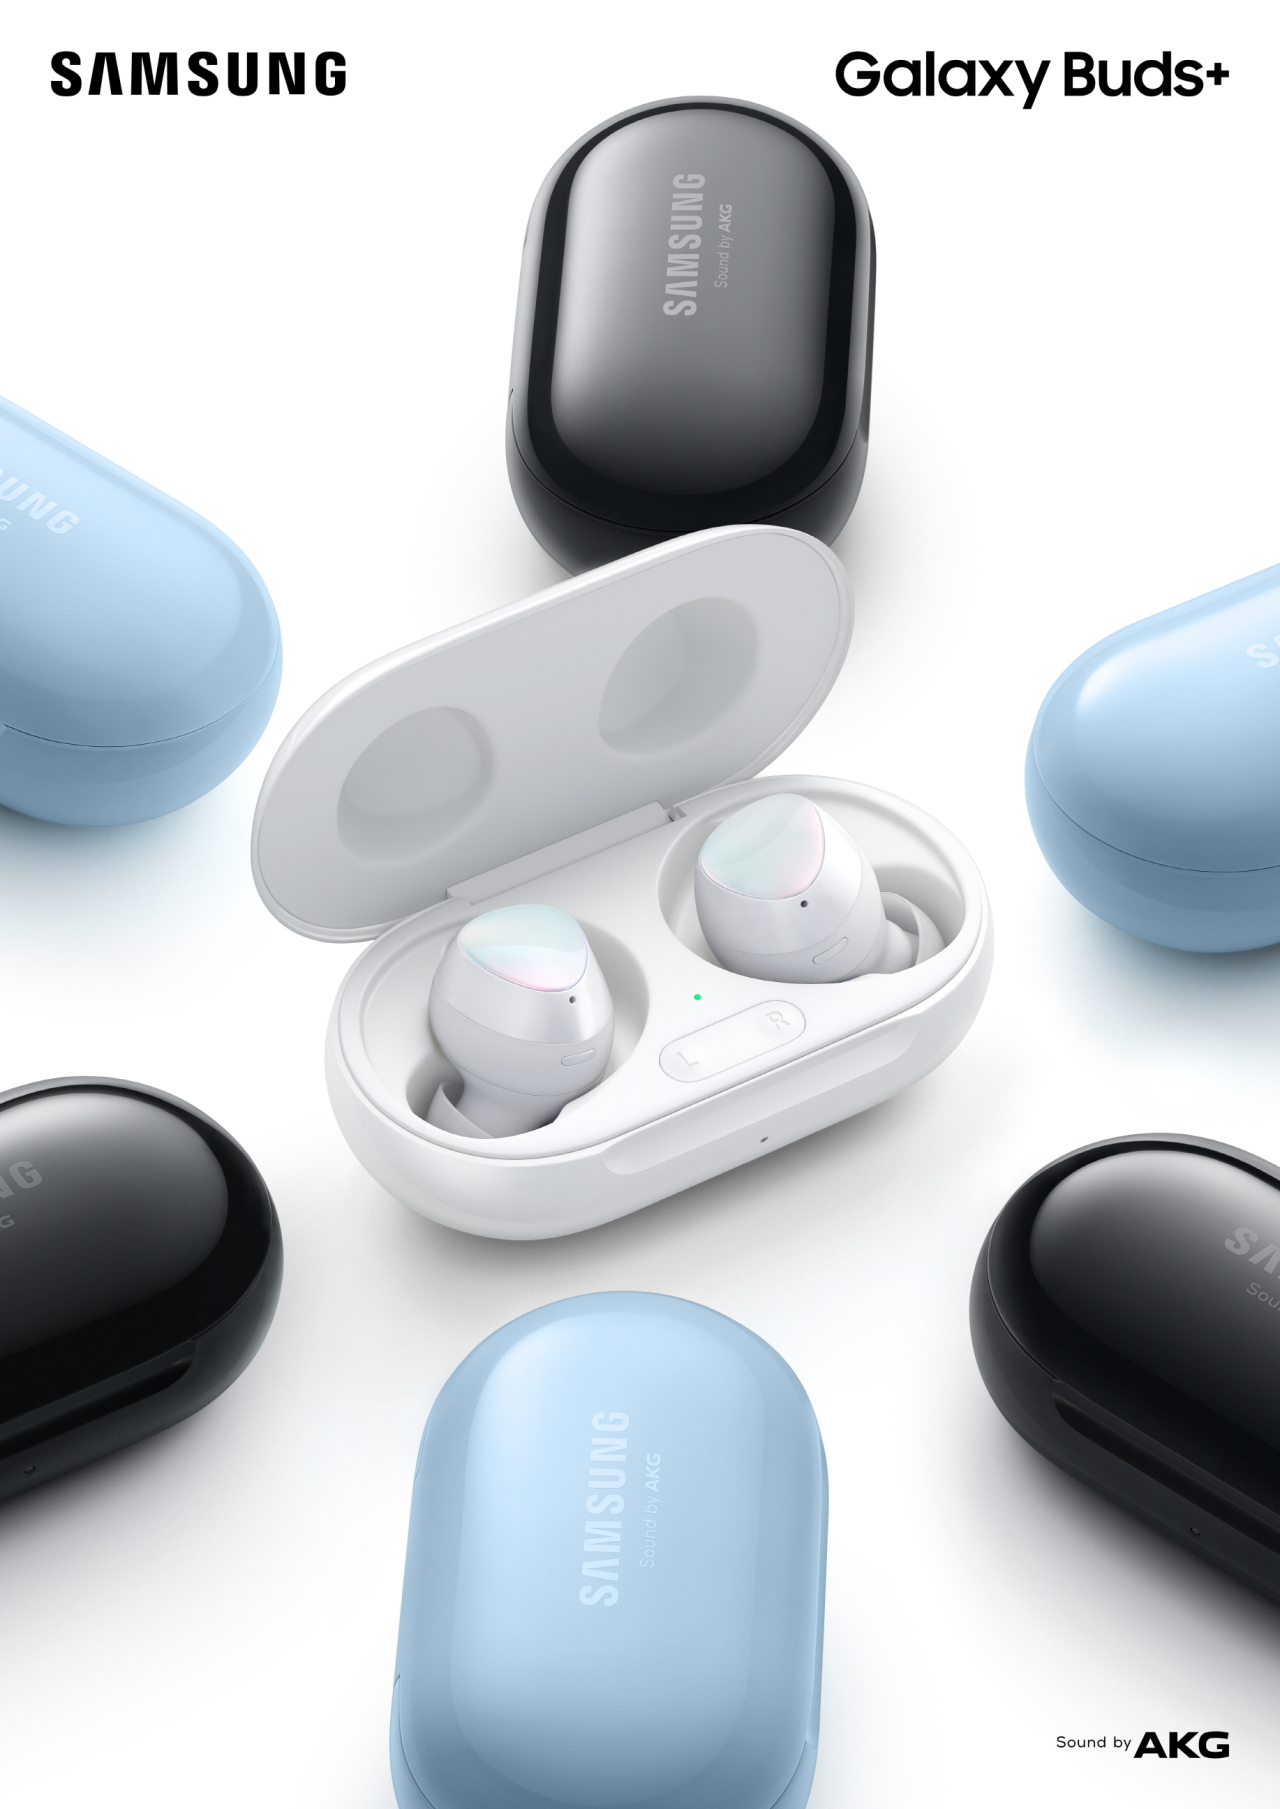 Galaxy Buds+ comes in black, white and blue colors (Samsung Electronics)